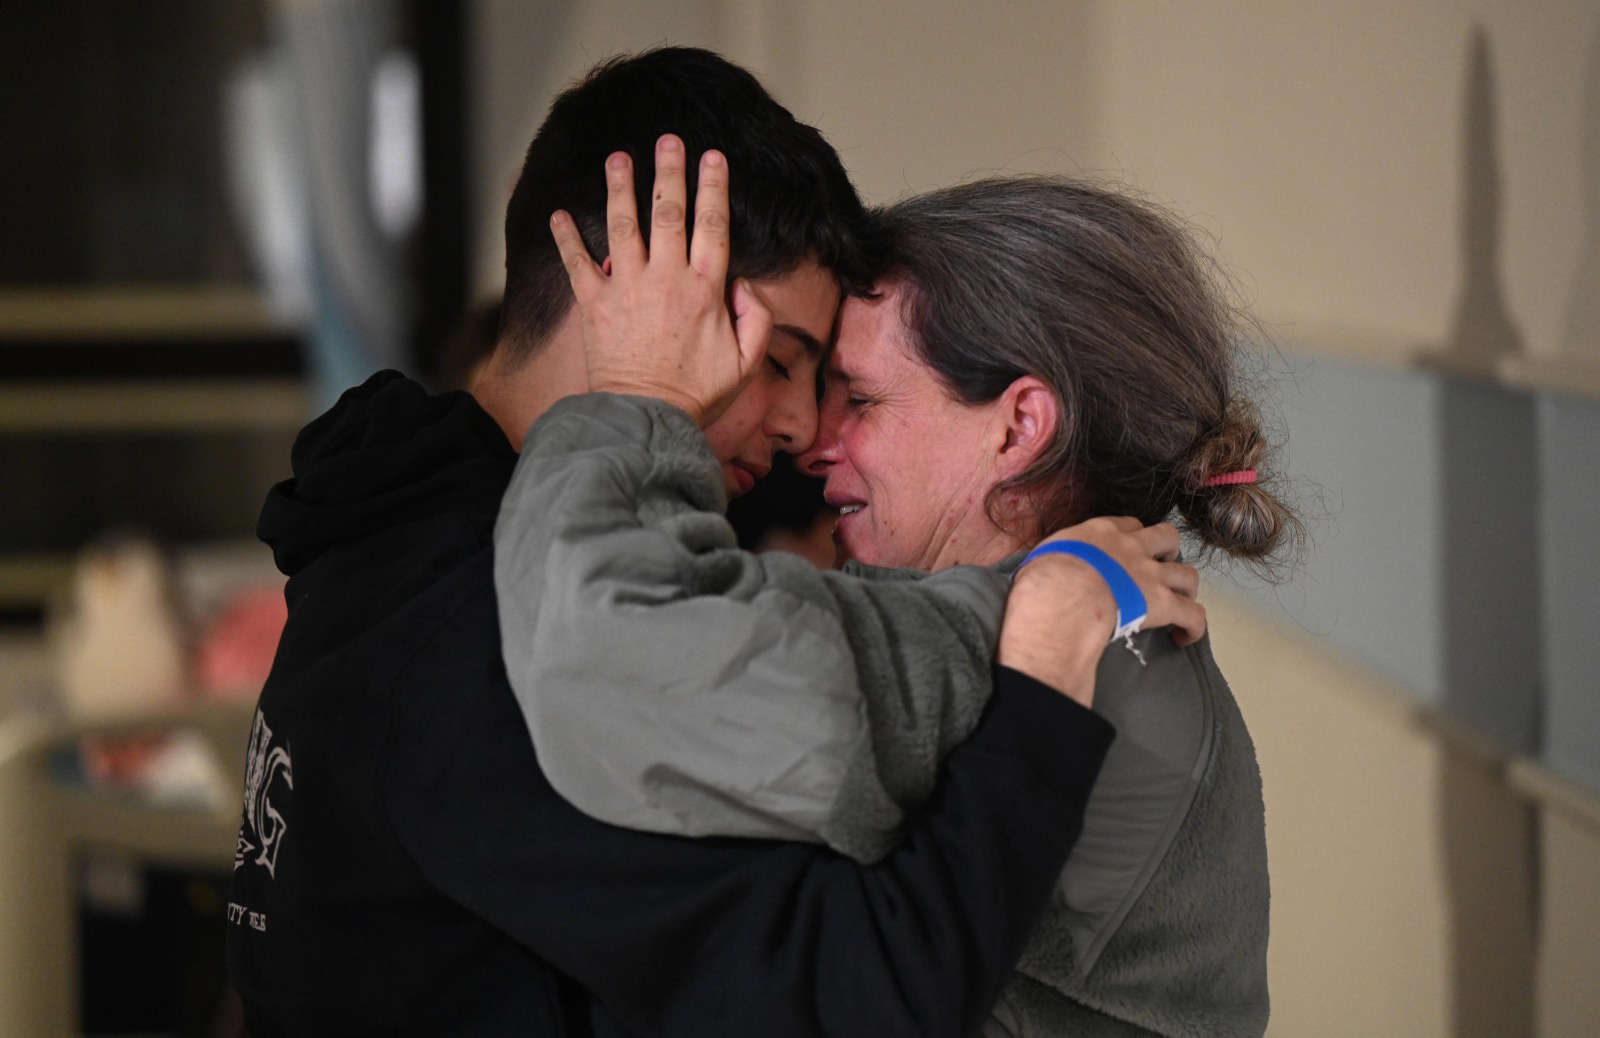 Hostage reunited with family